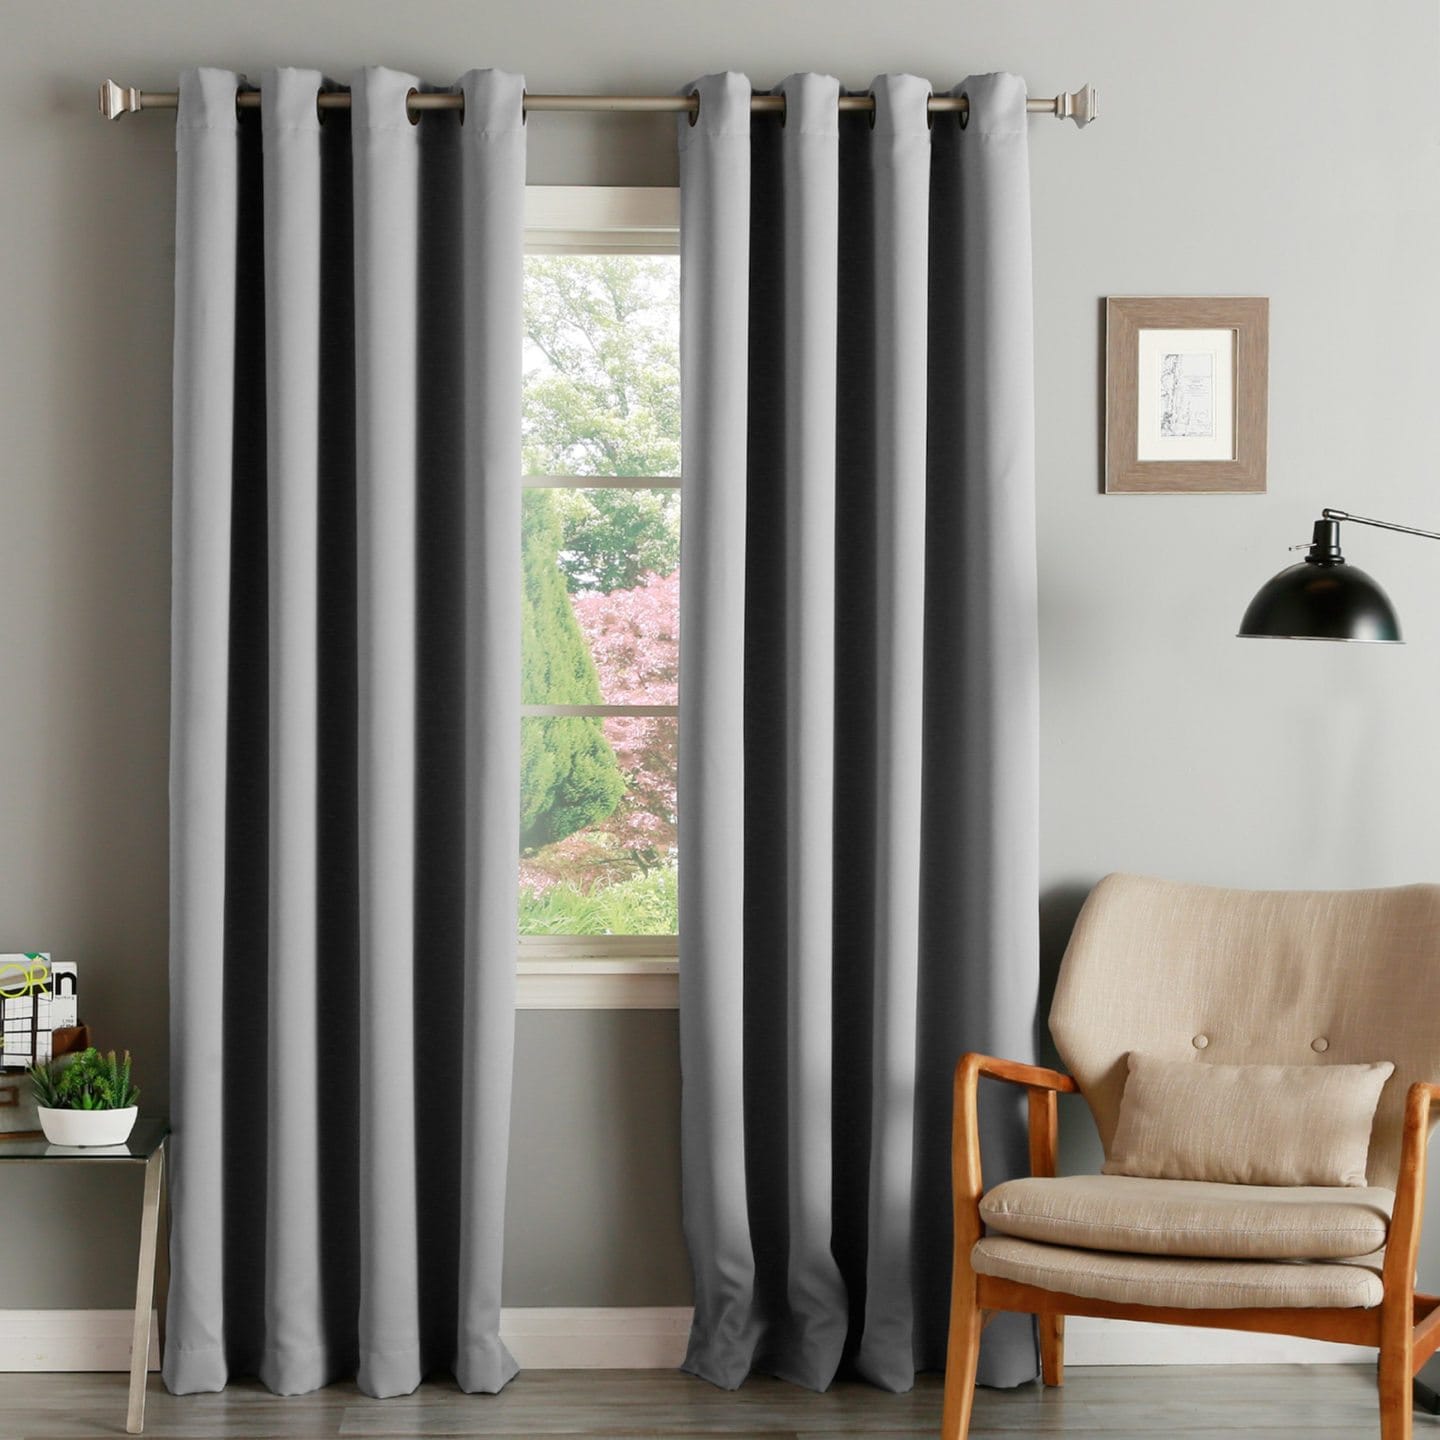 Details about   Naruto0 Itachi Blackout Curtain Panel Thermal Insulated Window Drapes 2 Panel 